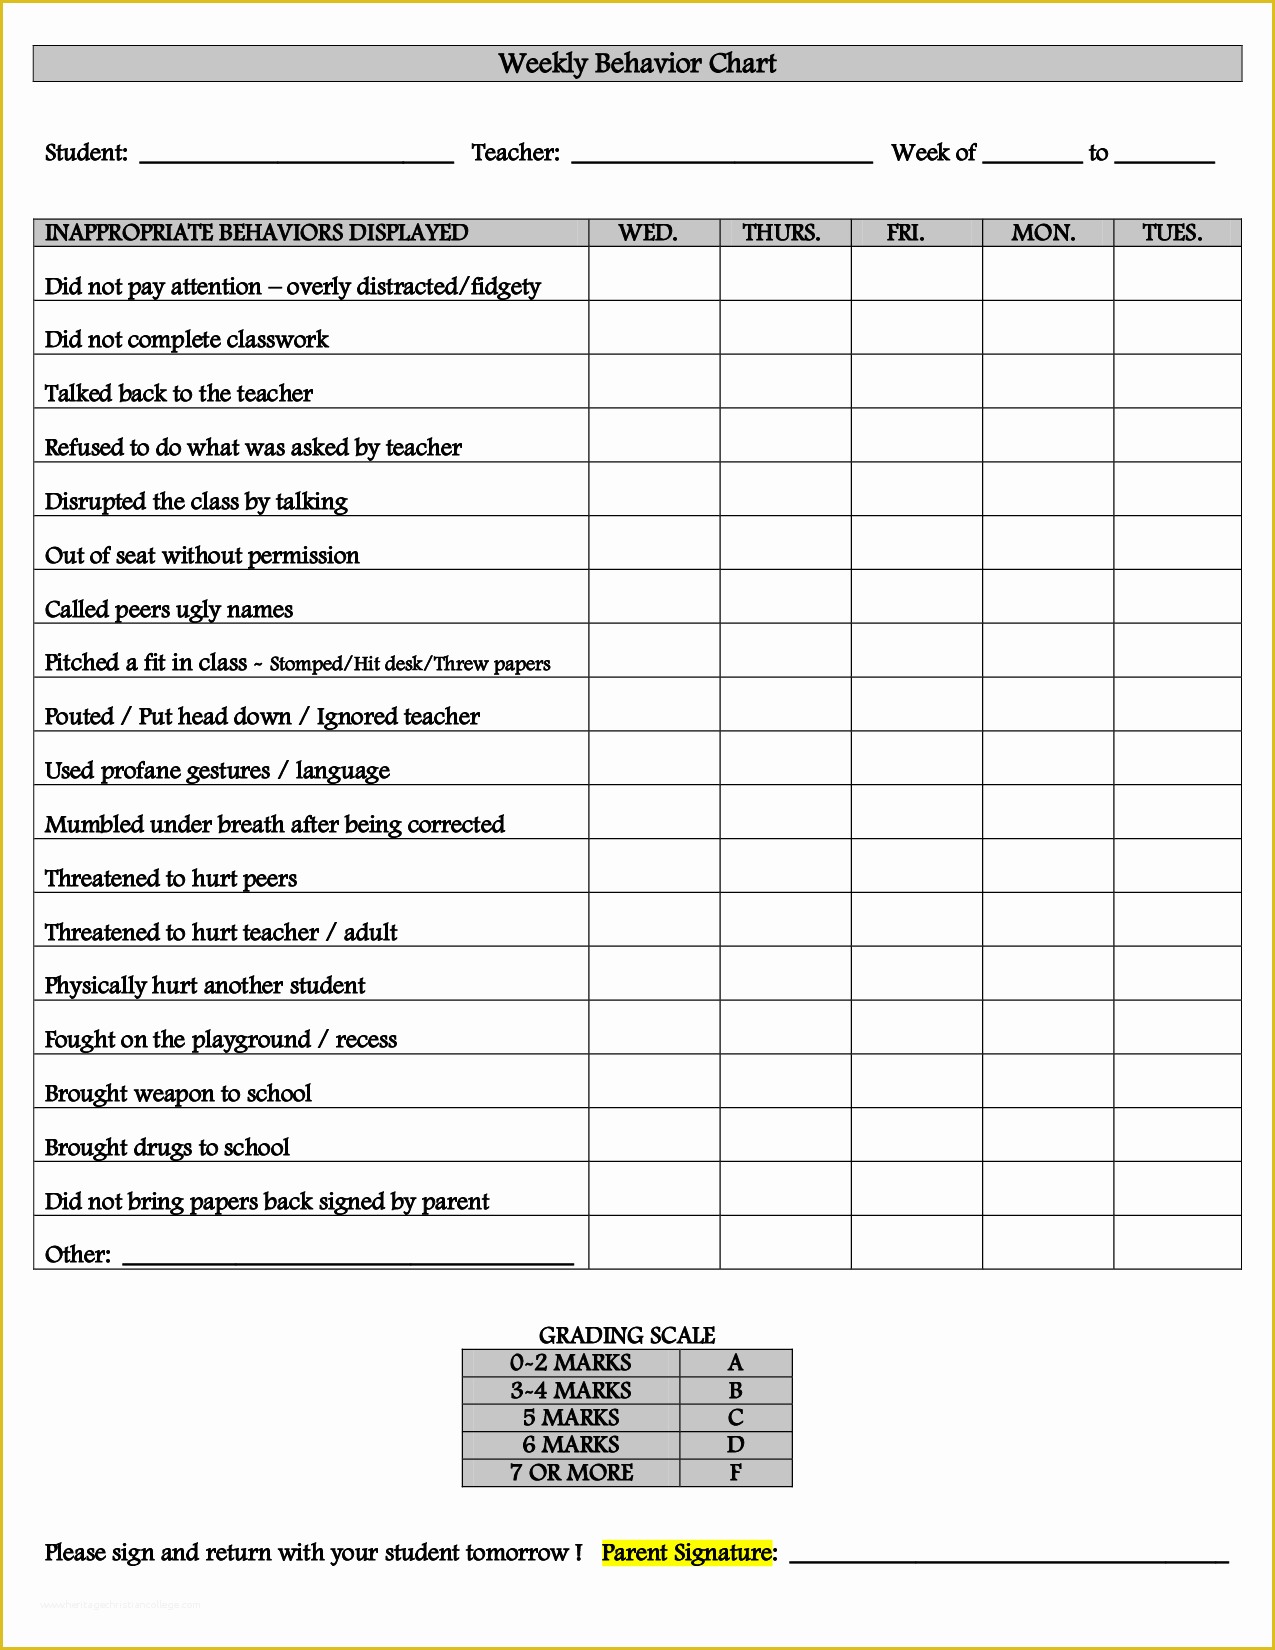 Free Behavior Chart Template Of Free Printable Behavior Charts for Middle School Students